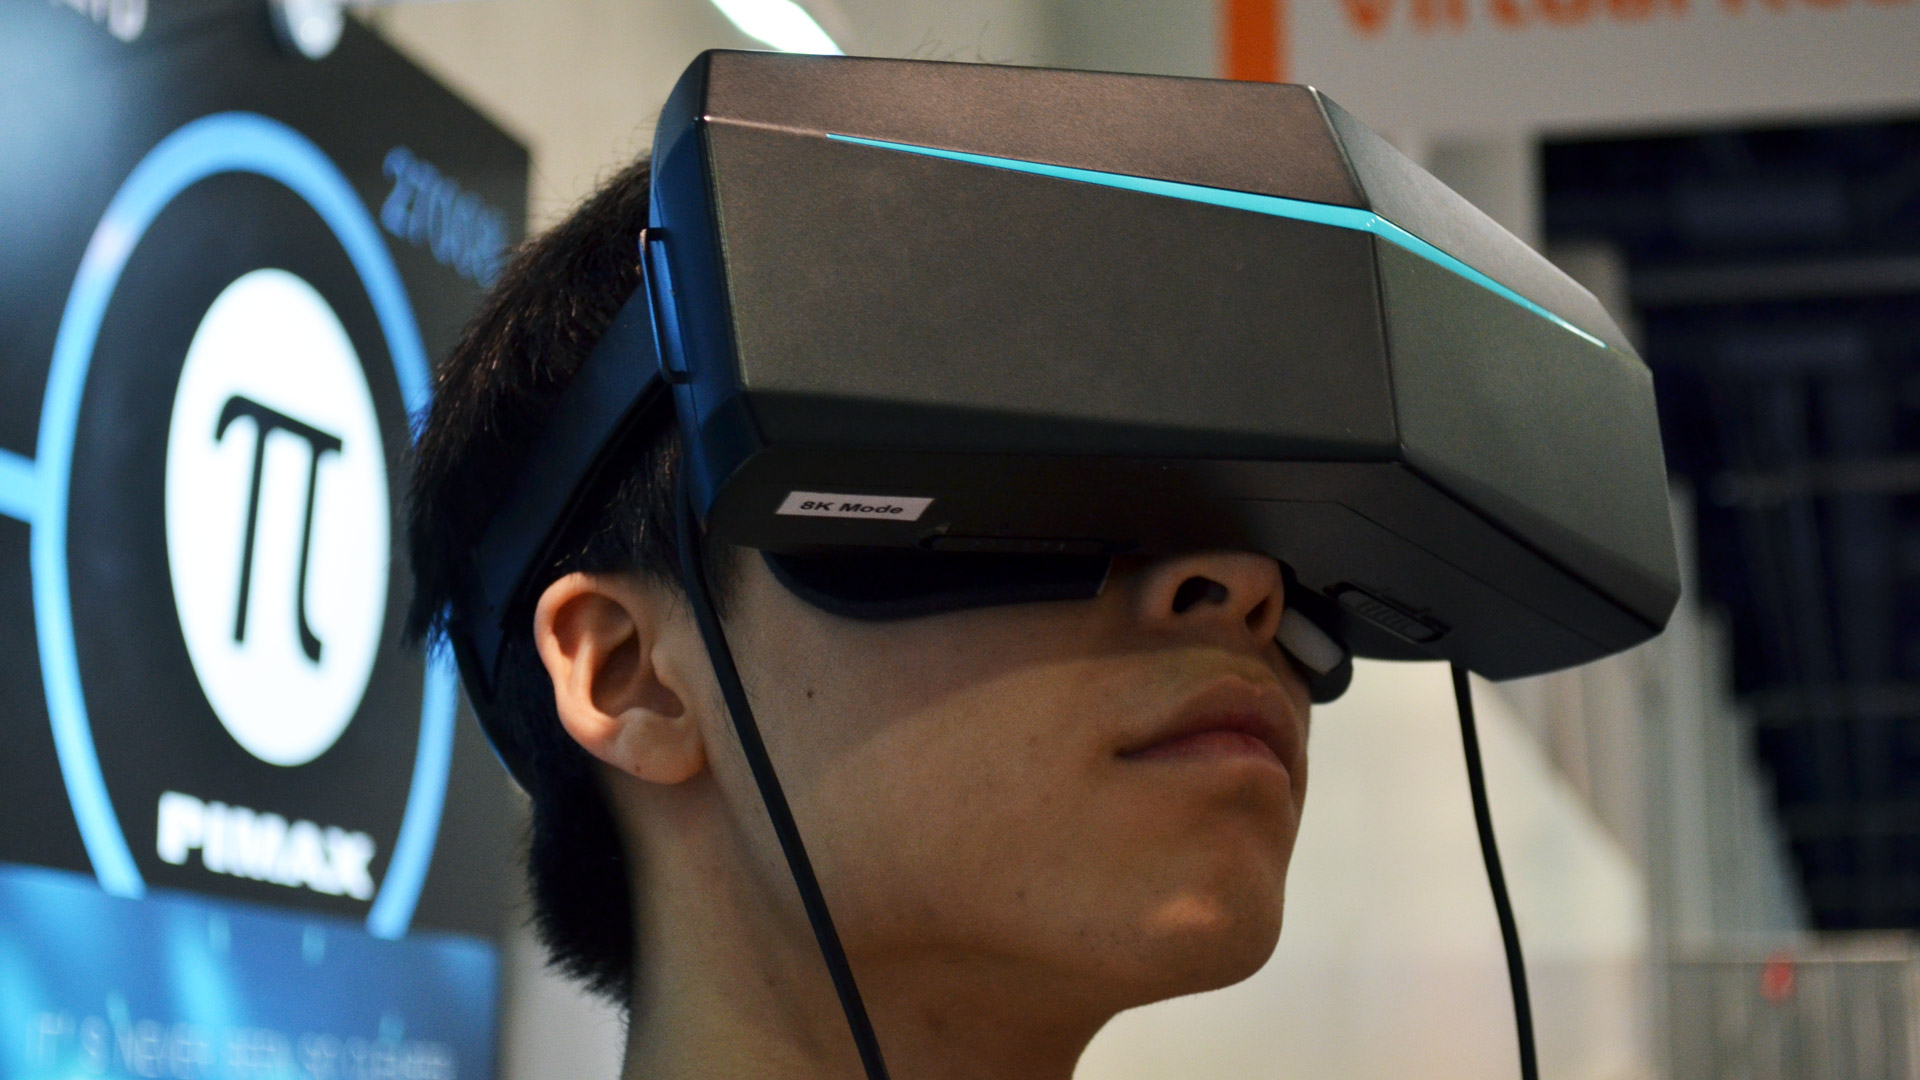 pimax vr headset review